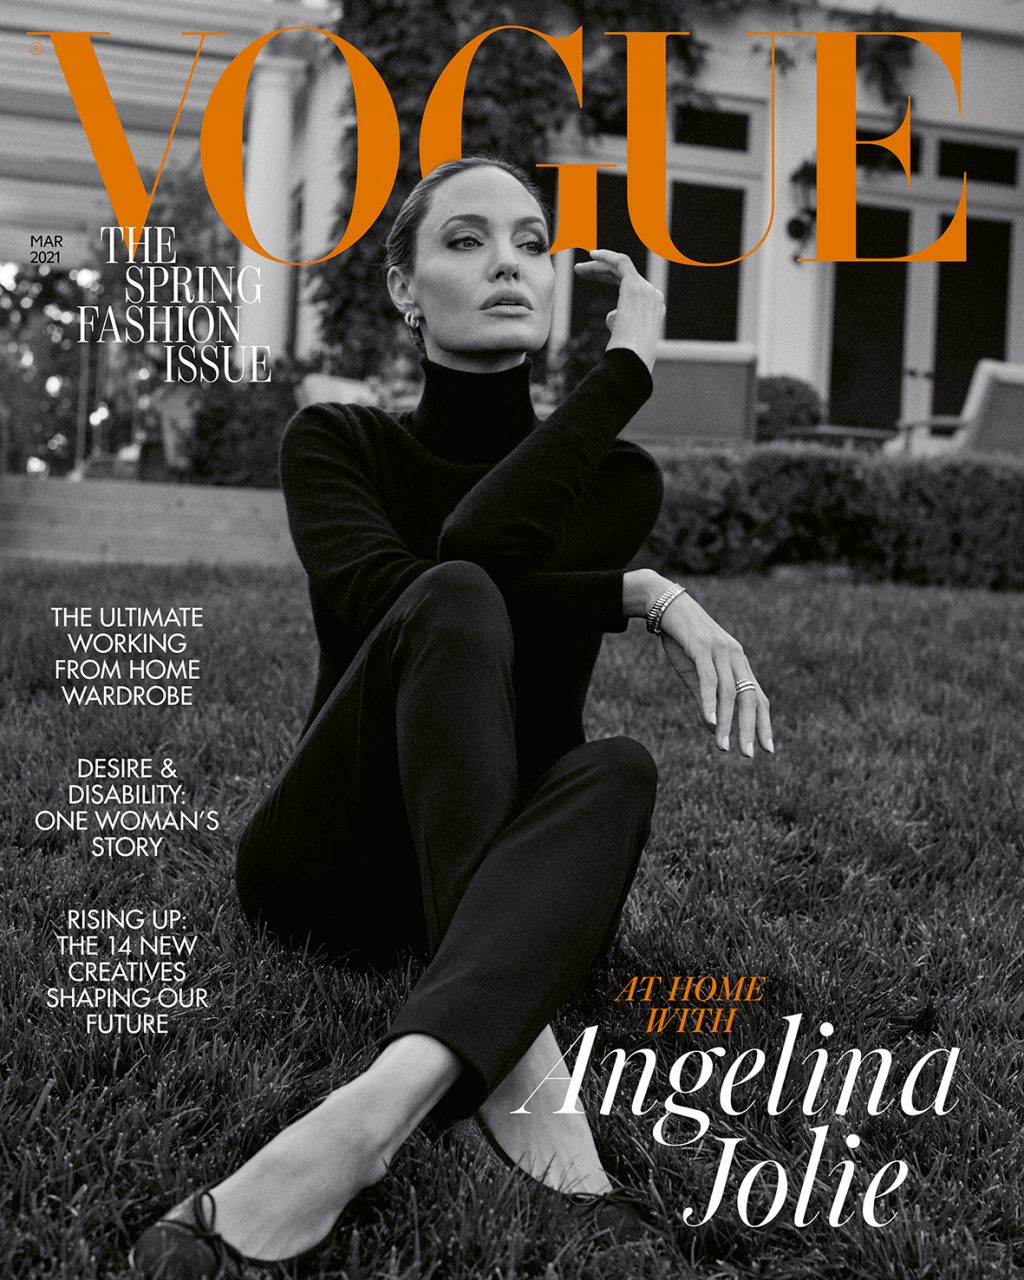 See all 27 editions of Vogue's The Creativity Issue covers